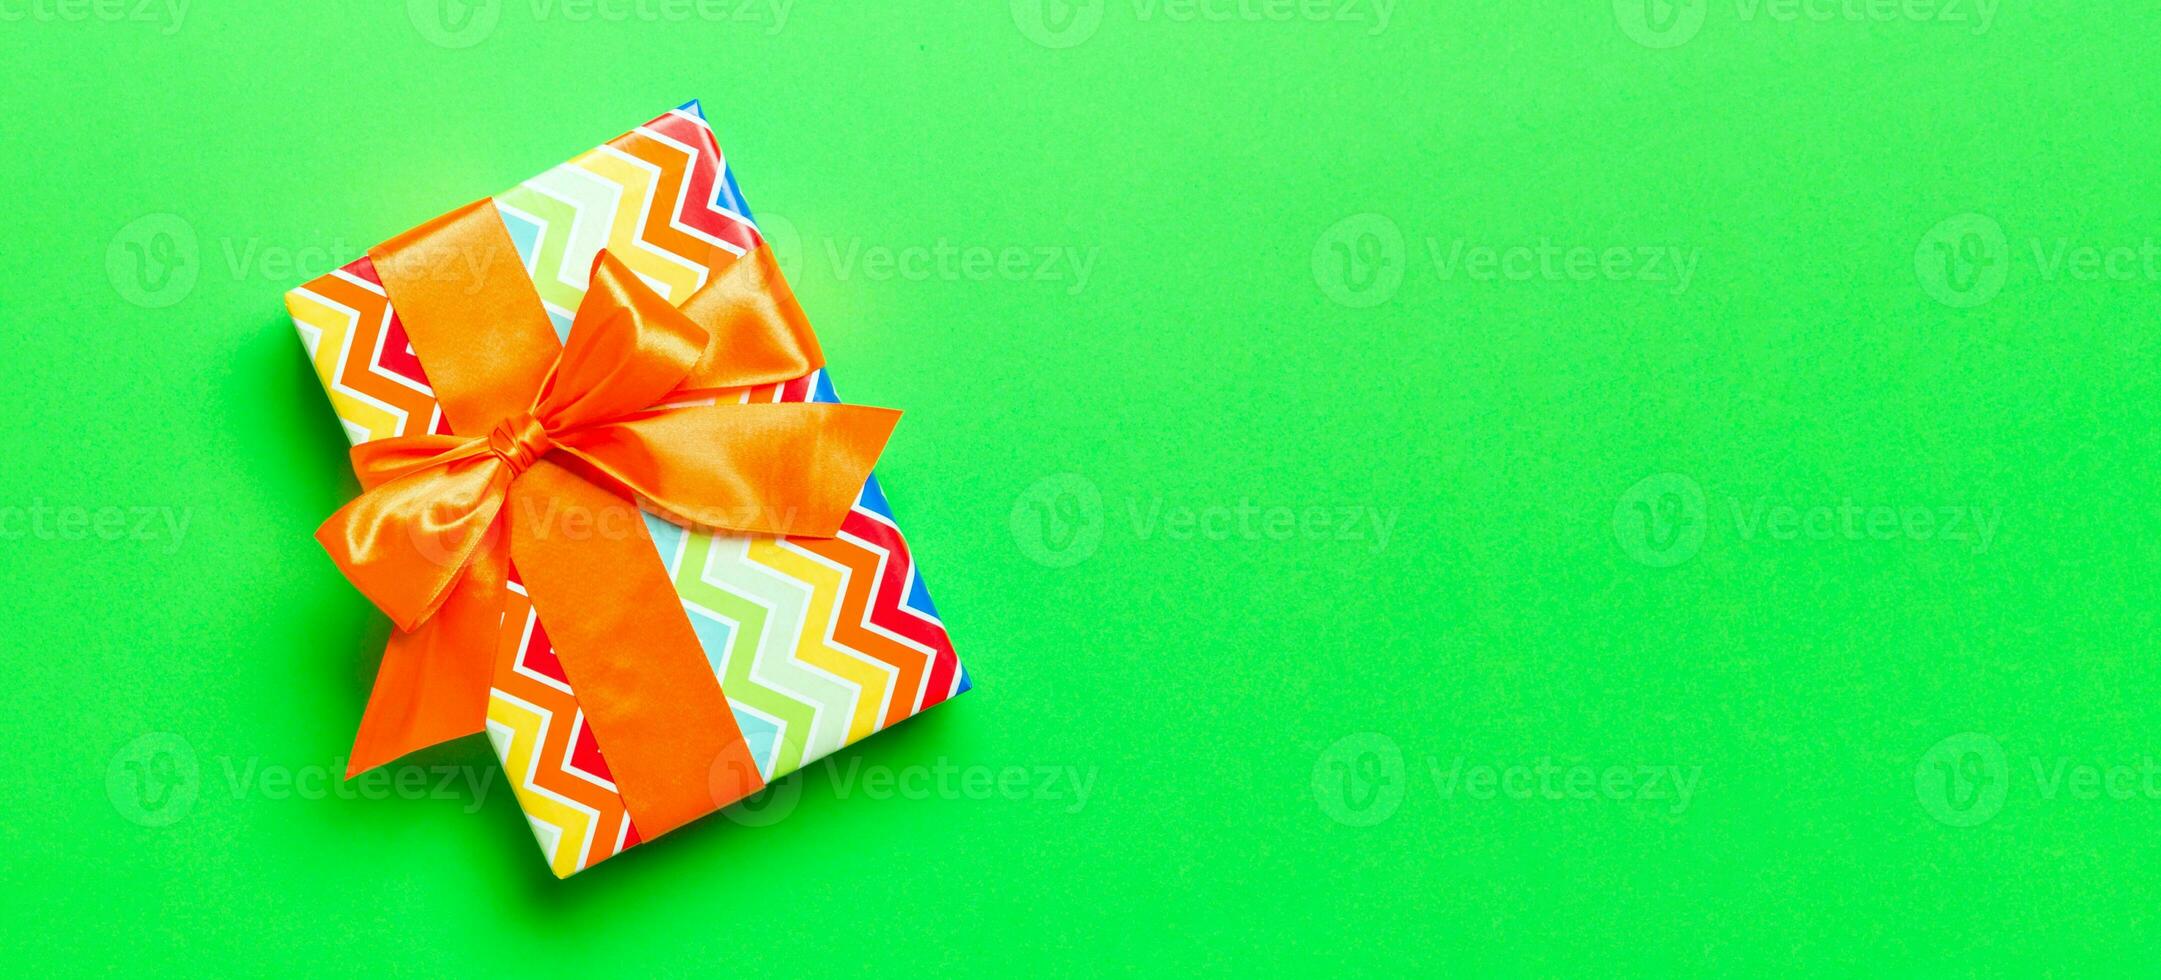 Top view Christmas present box with orange bow on green background with copy space photo